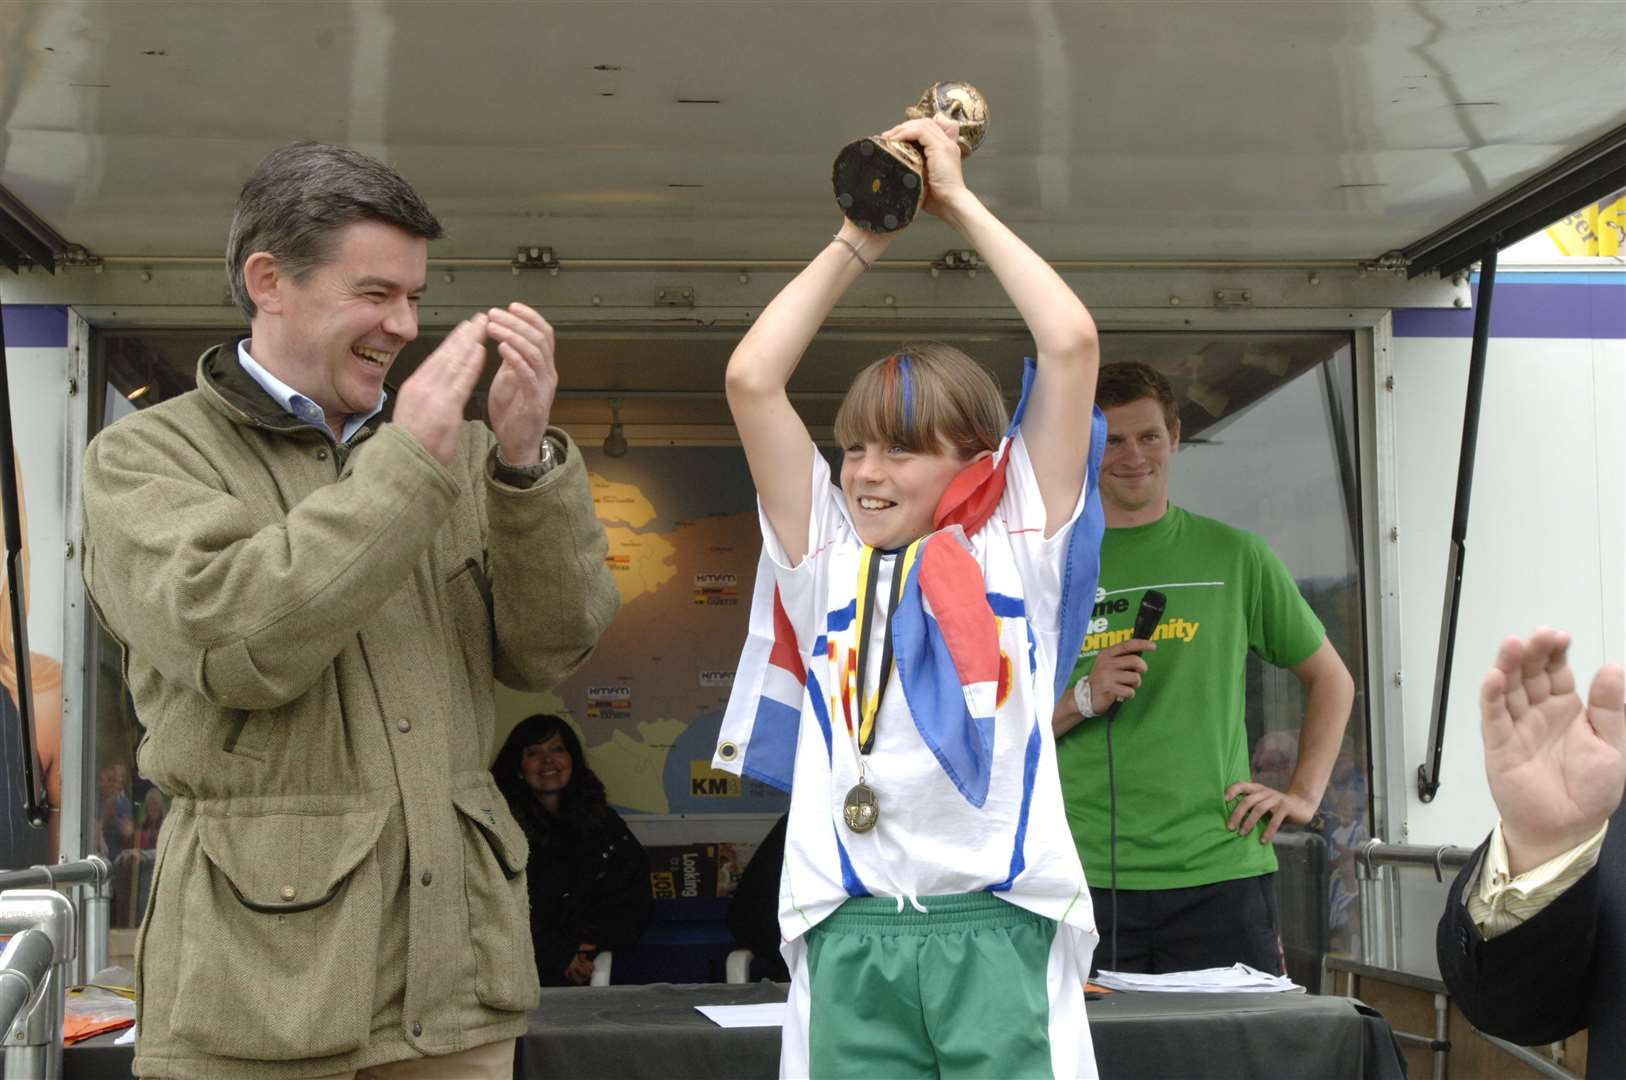 Alessia Russo, aged 11, captain of East Farleigh Primary School Football team, winning the Kent Messenger Mini World Cup at Mote Park in 2010